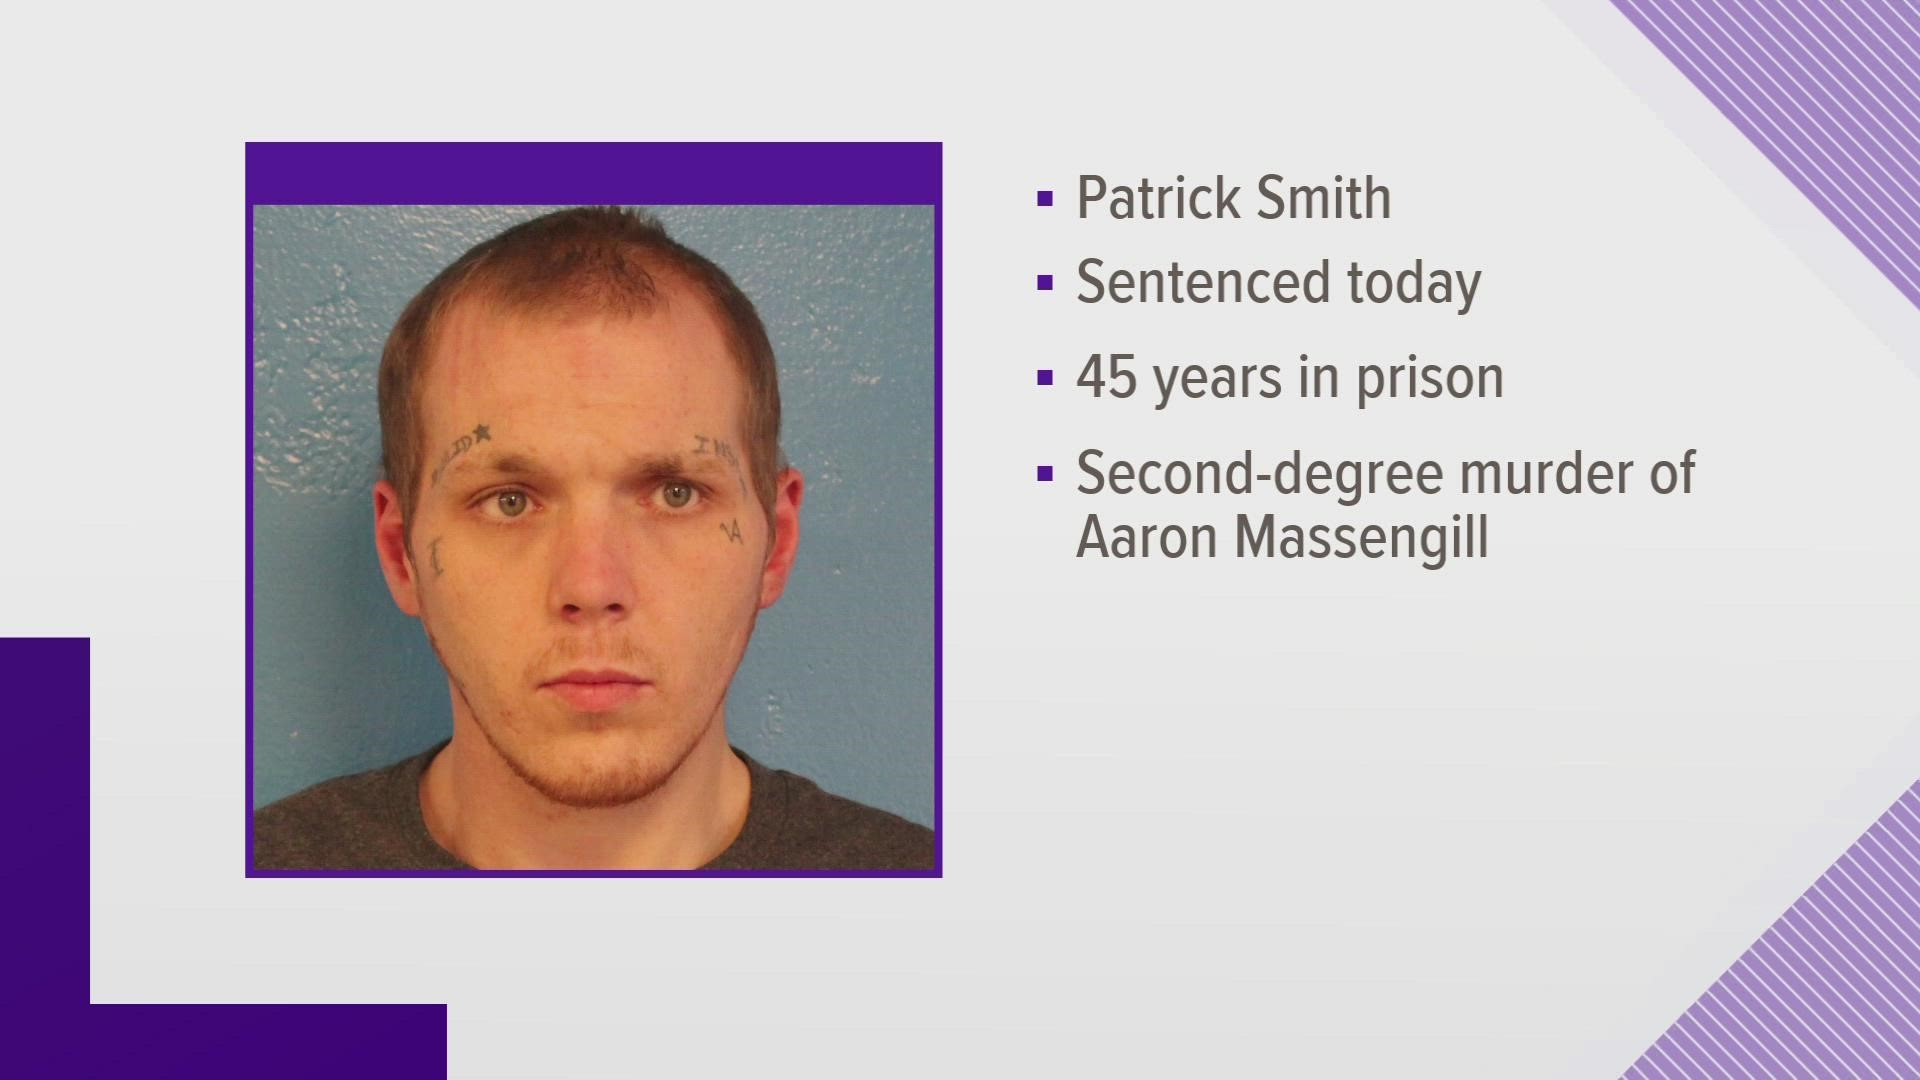 Patrick Smith was one of three people arrested in April 2021 after investigators found Massengill's body along Ferguson Ridge Road in Tazewell in Feb. 2021.